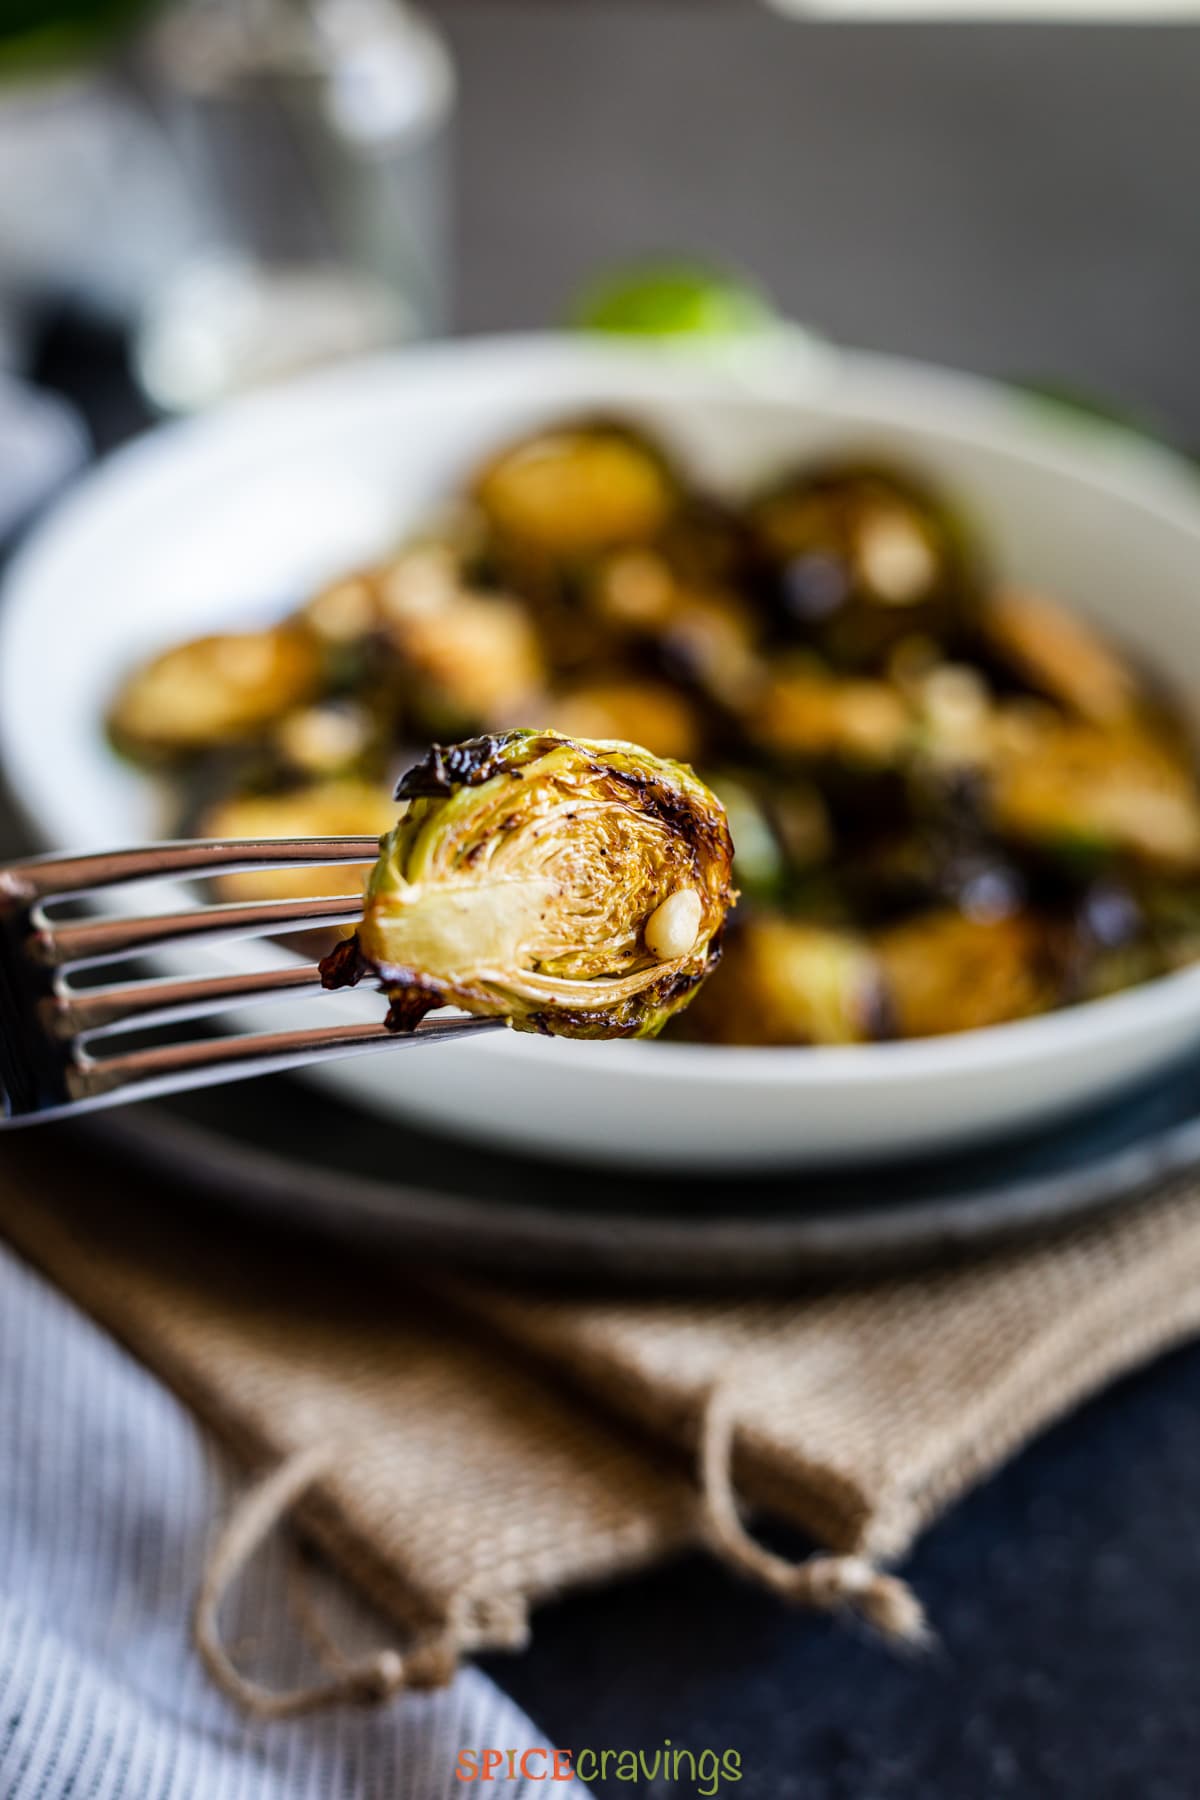 Roasted Air fried brussel sprout on fork